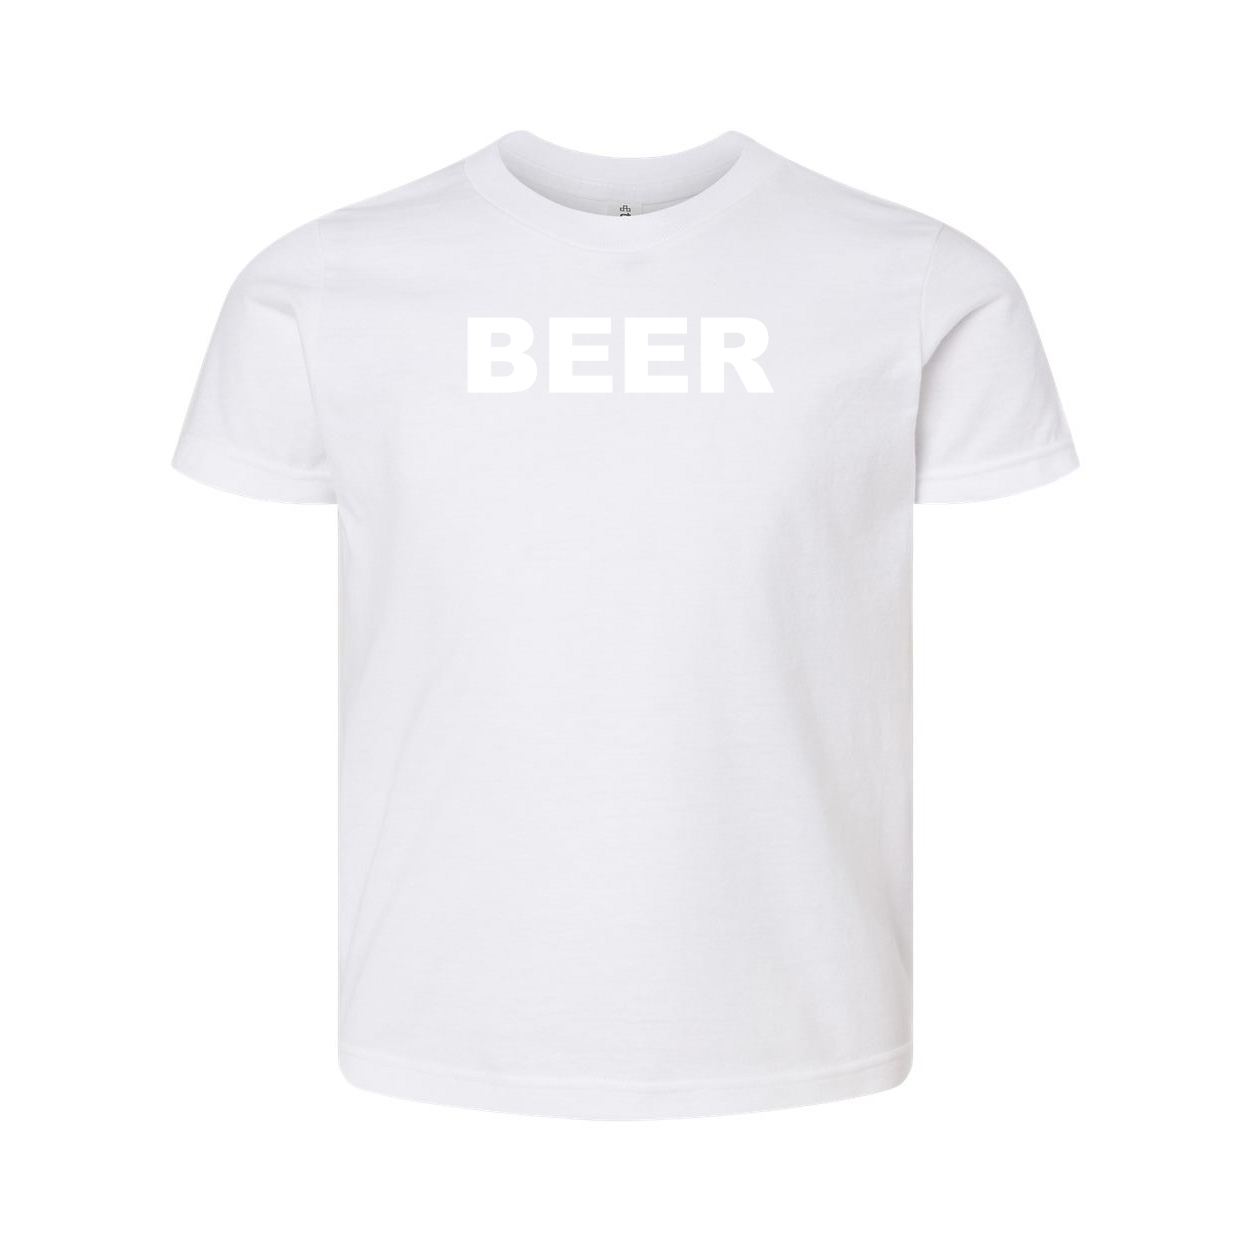 Beer Brand Logo Classic Youth T-Shirt White